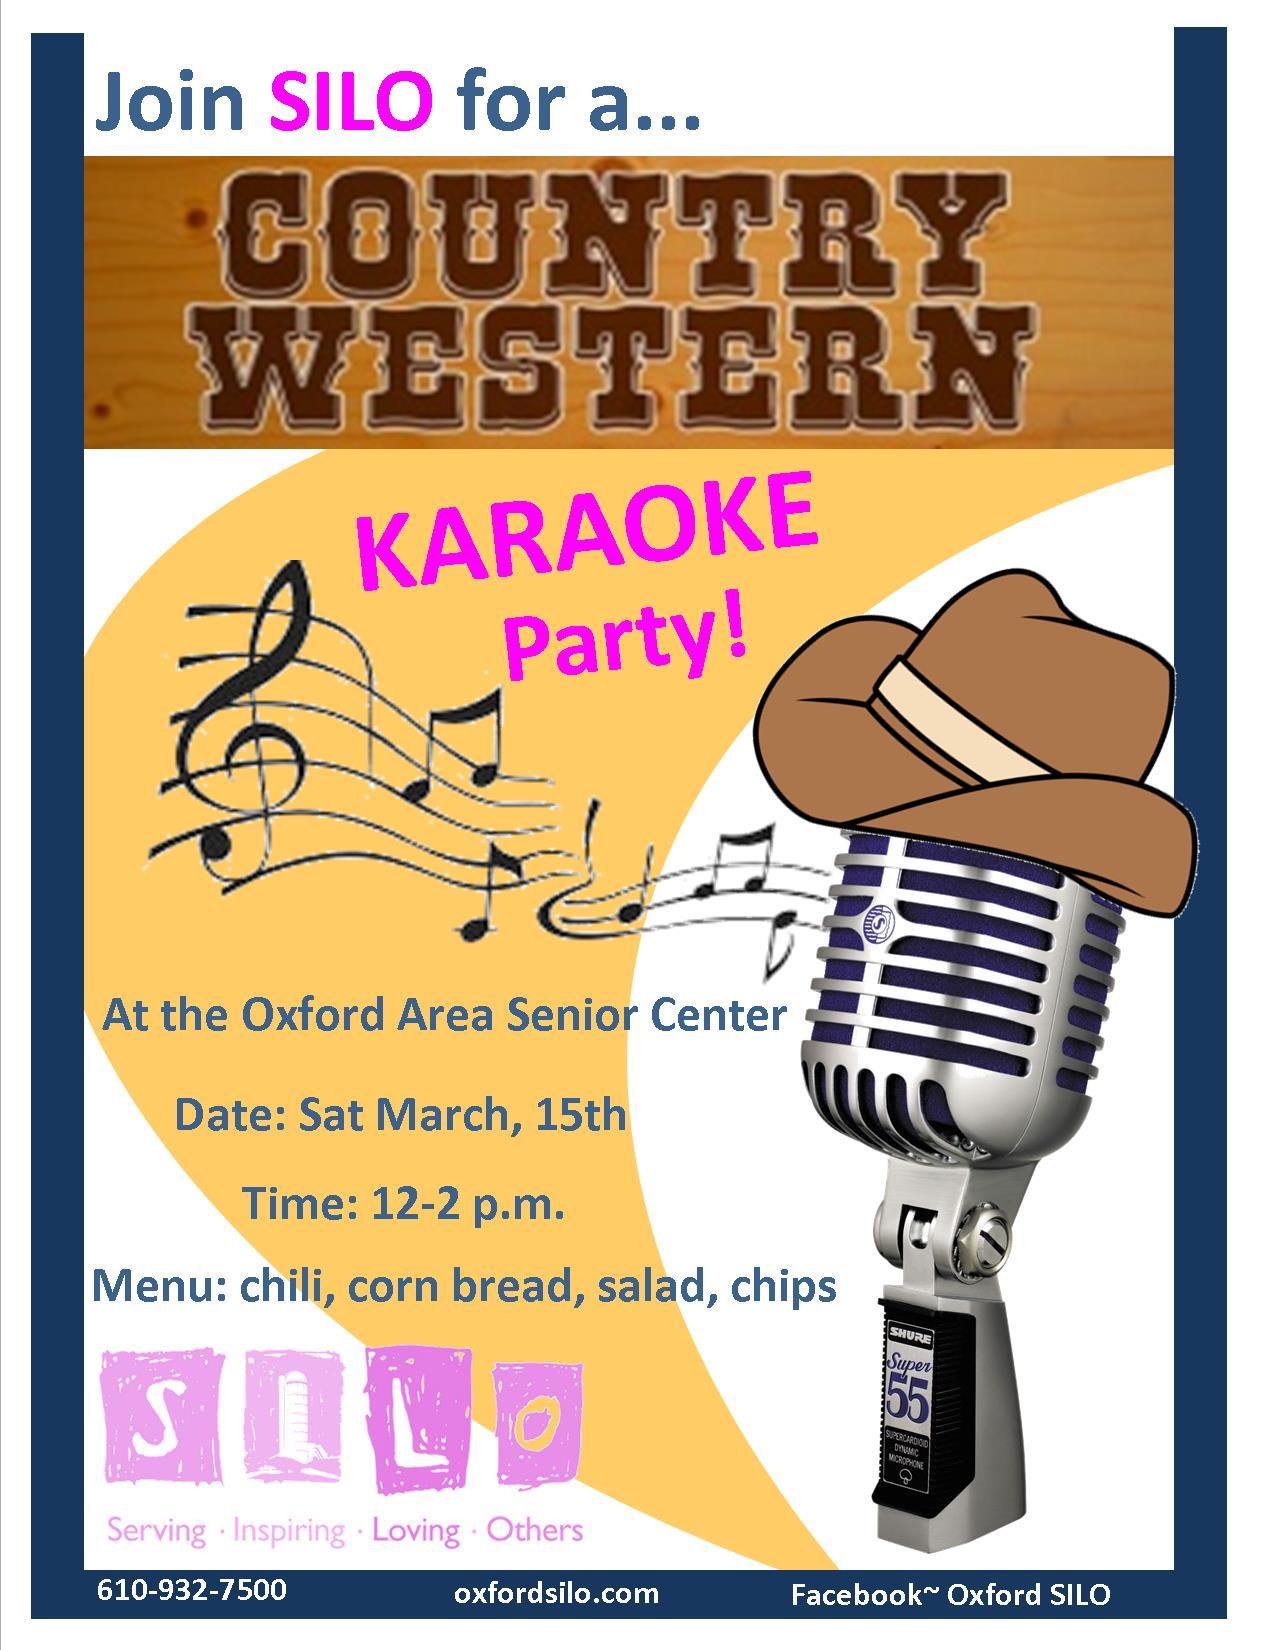 Country Western Karaoke Party, March 15th, 12-2pm at the Oxford Area Senior Center